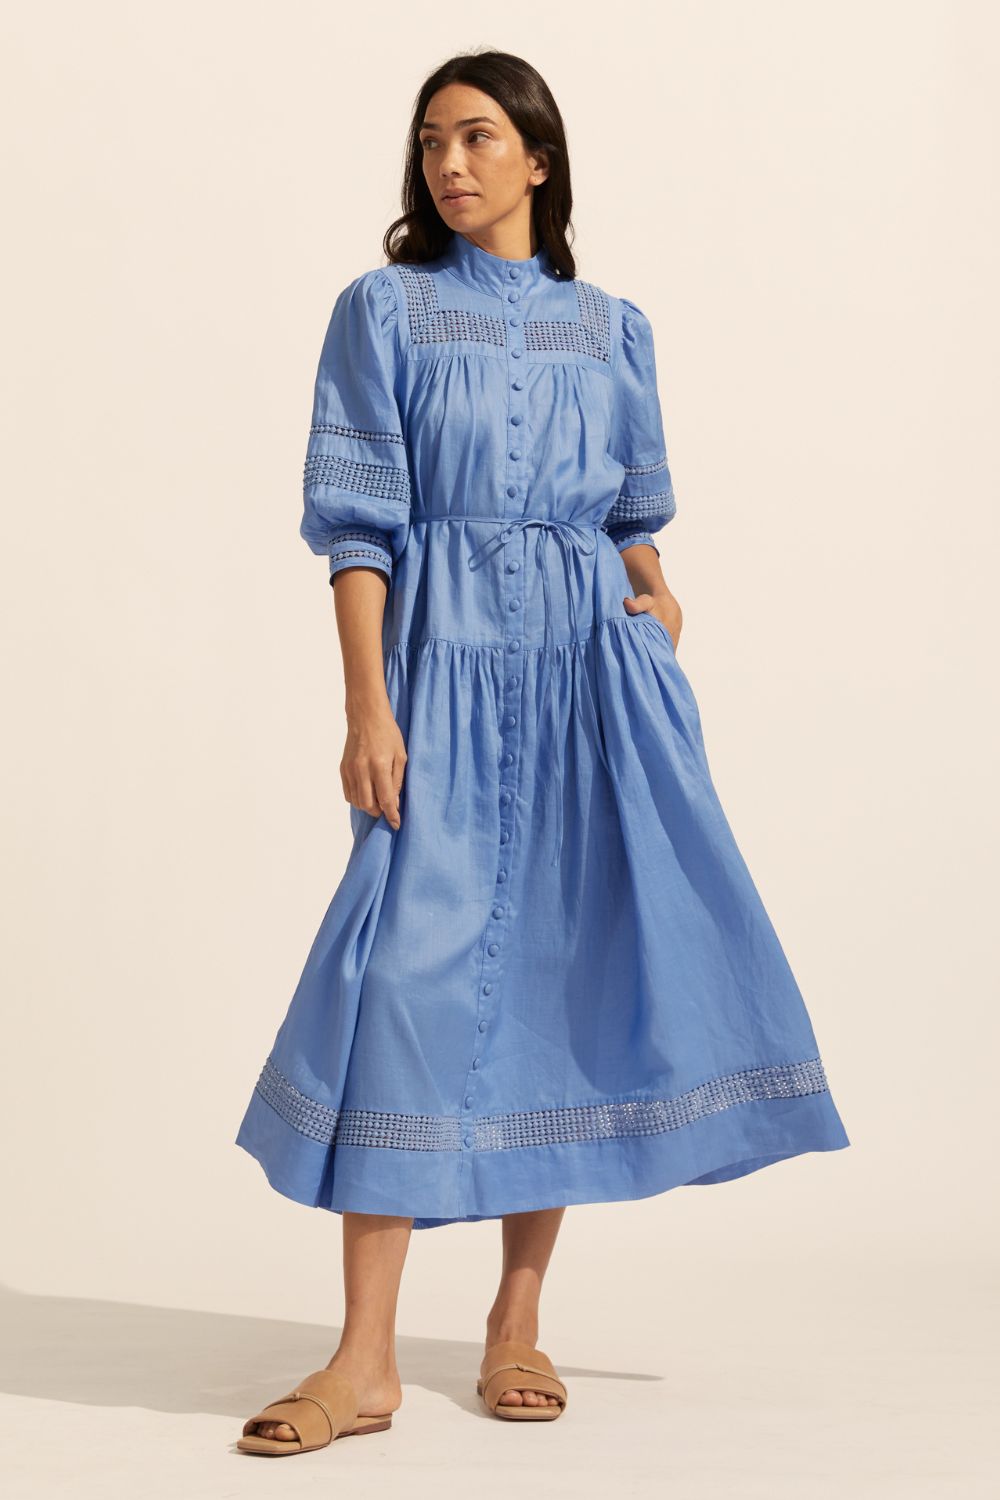 blue, maxi dress, button through, cuffed sleeves, self tie belt, embroidered detailing, high neckline, front image